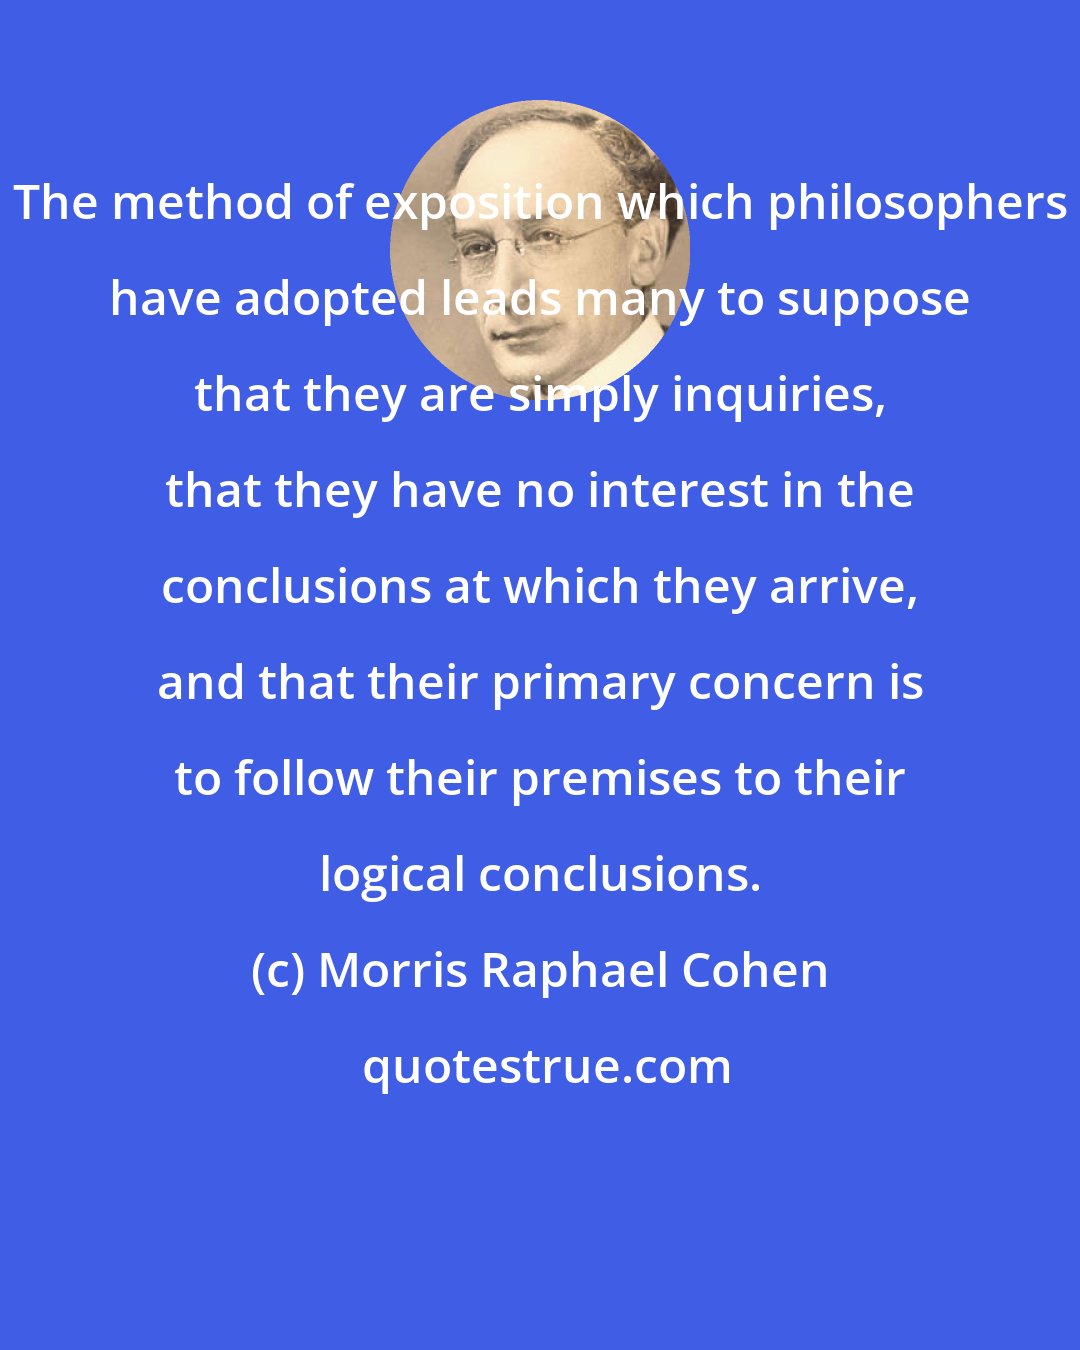 Morris Raphael Cohen: The method of exposition which philosophers have adopted leads many to suppose that they are simply inquiries, that they have no interest in the conclusions at which they arrive, and that their primary concern is to follow their premises to their logical conclusions.